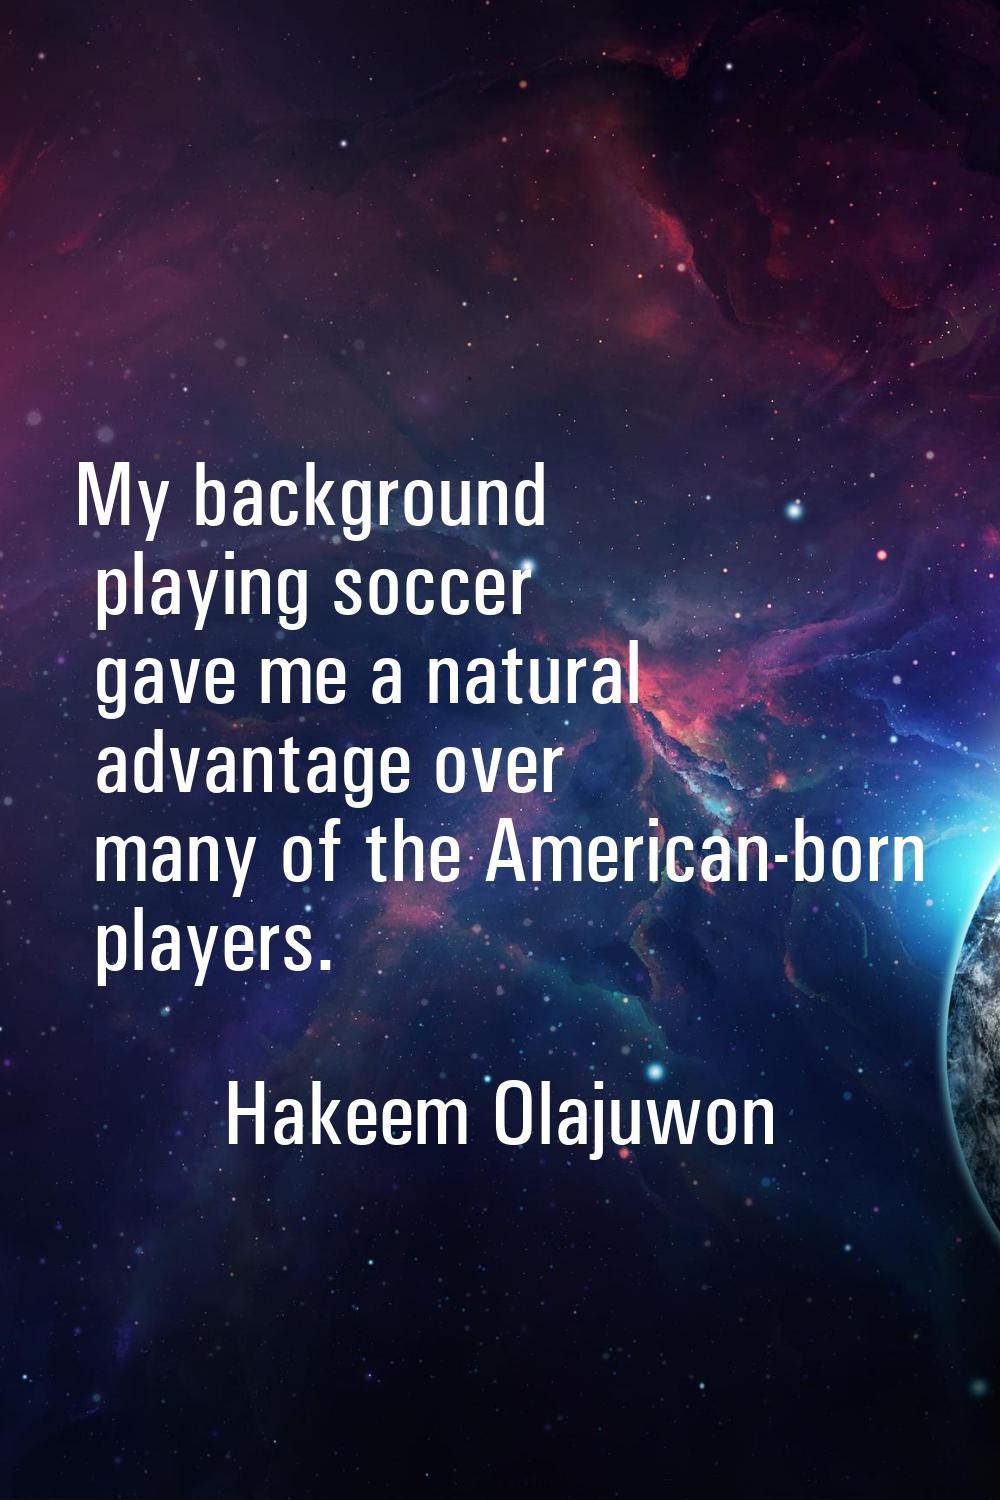 My background playing soccer gave me a natural advantage over many of the American-born players.